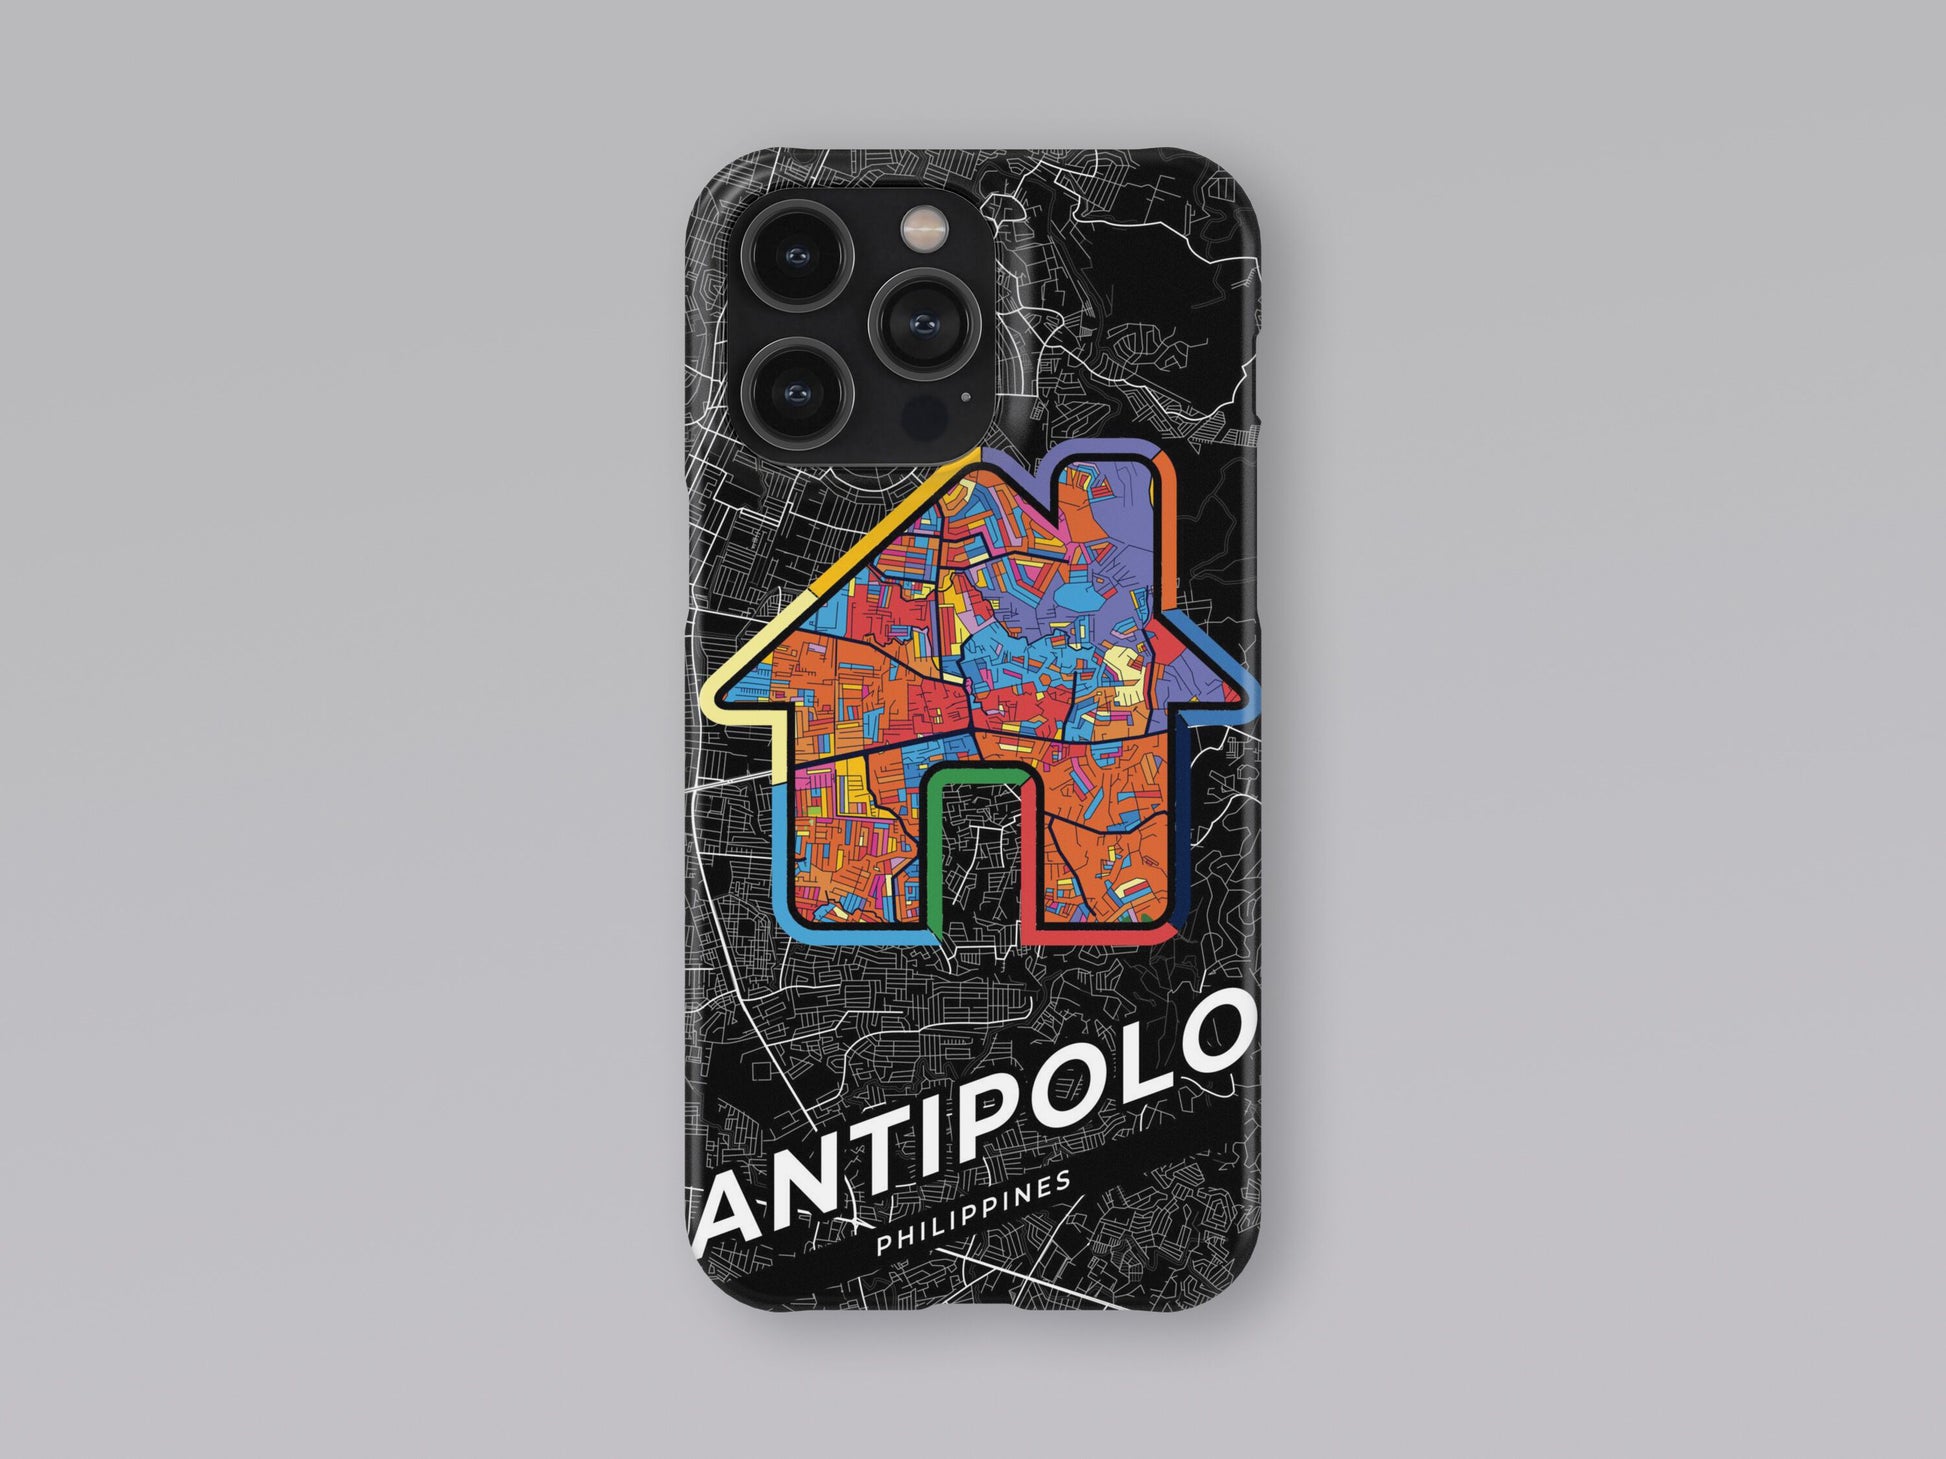 Antipolo Philippines slim phone case with colorful icon. Birthday, wedding or housewarming gift. Couple match cases. 3